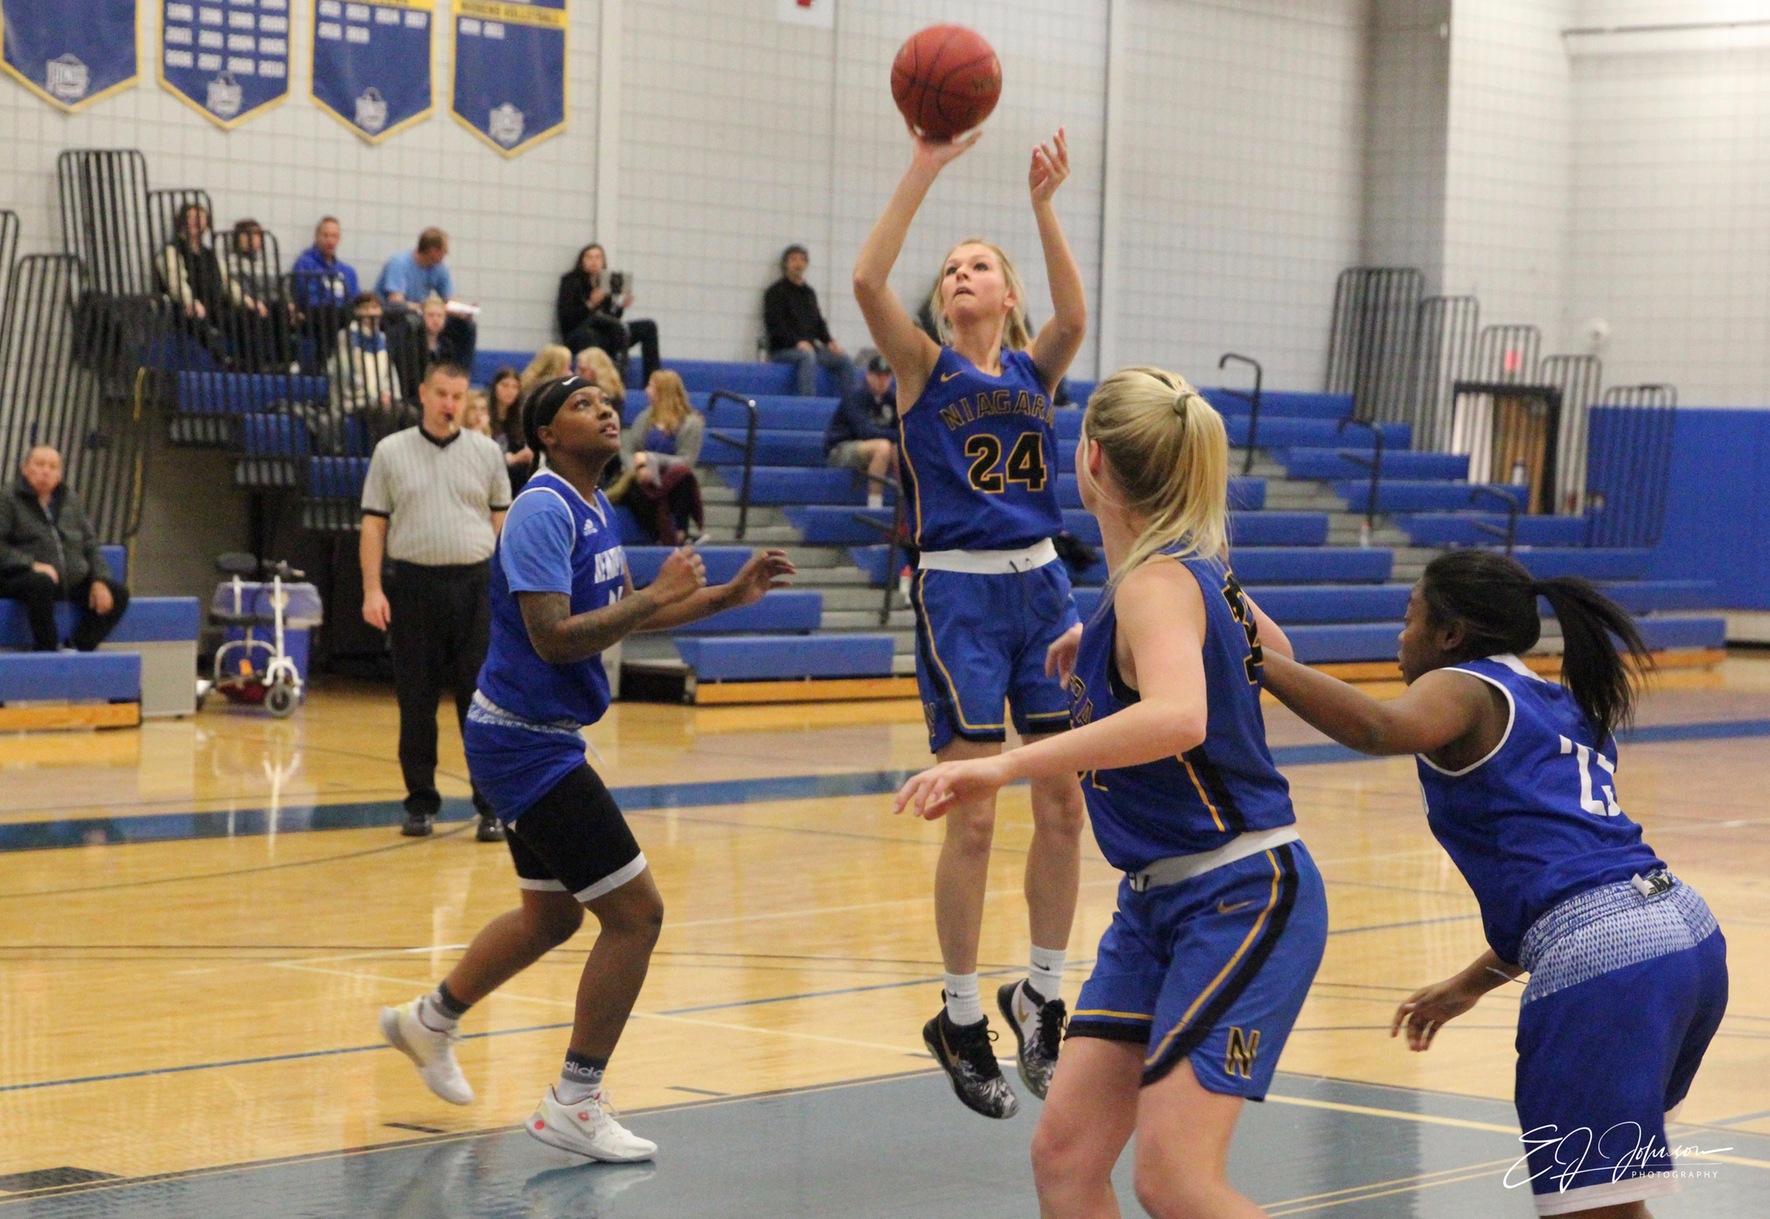 Defense leads NCCC to victory